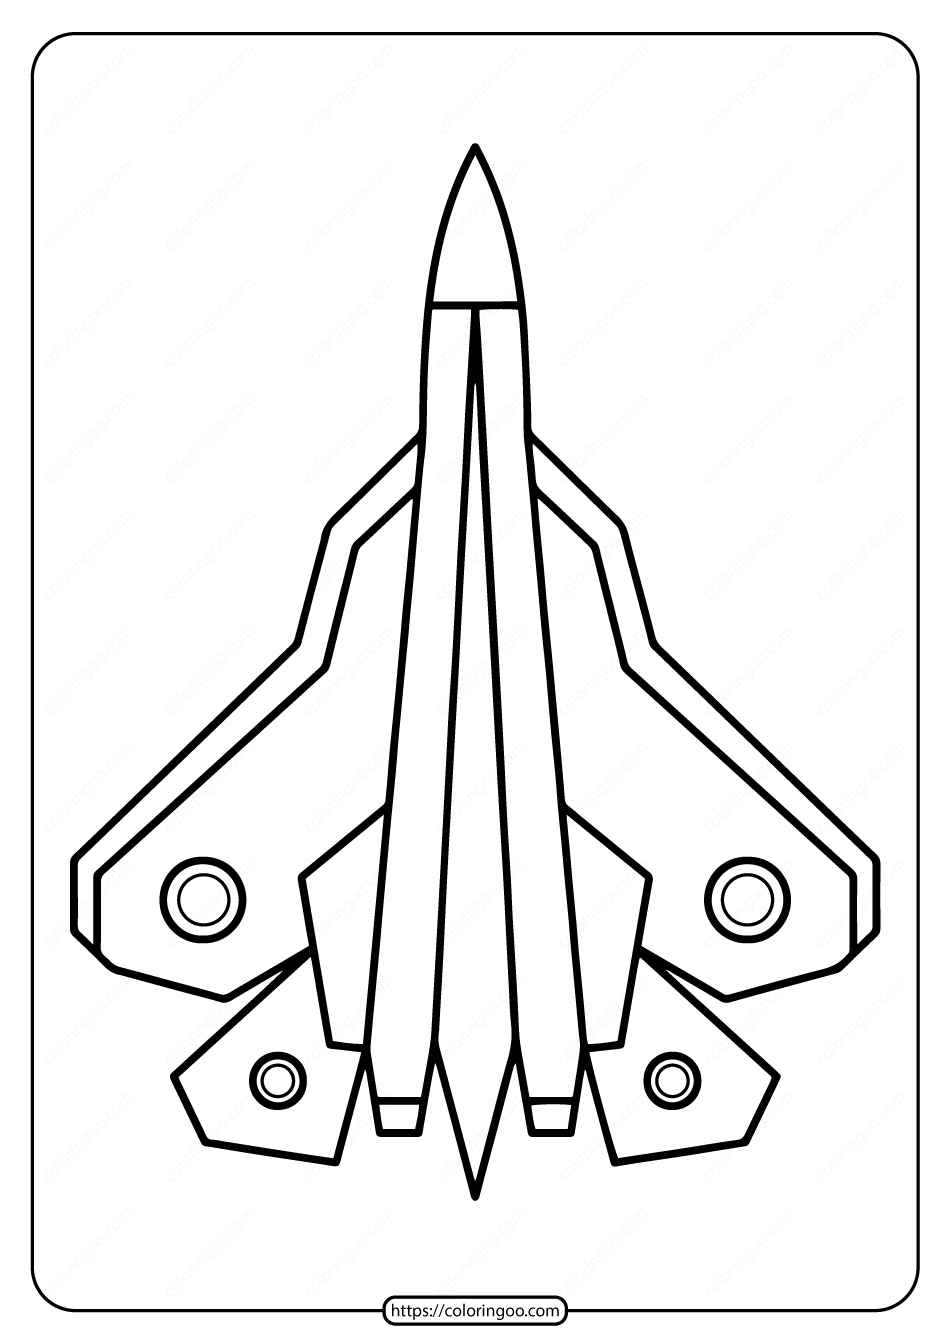 free printable military fighter plane coloring page